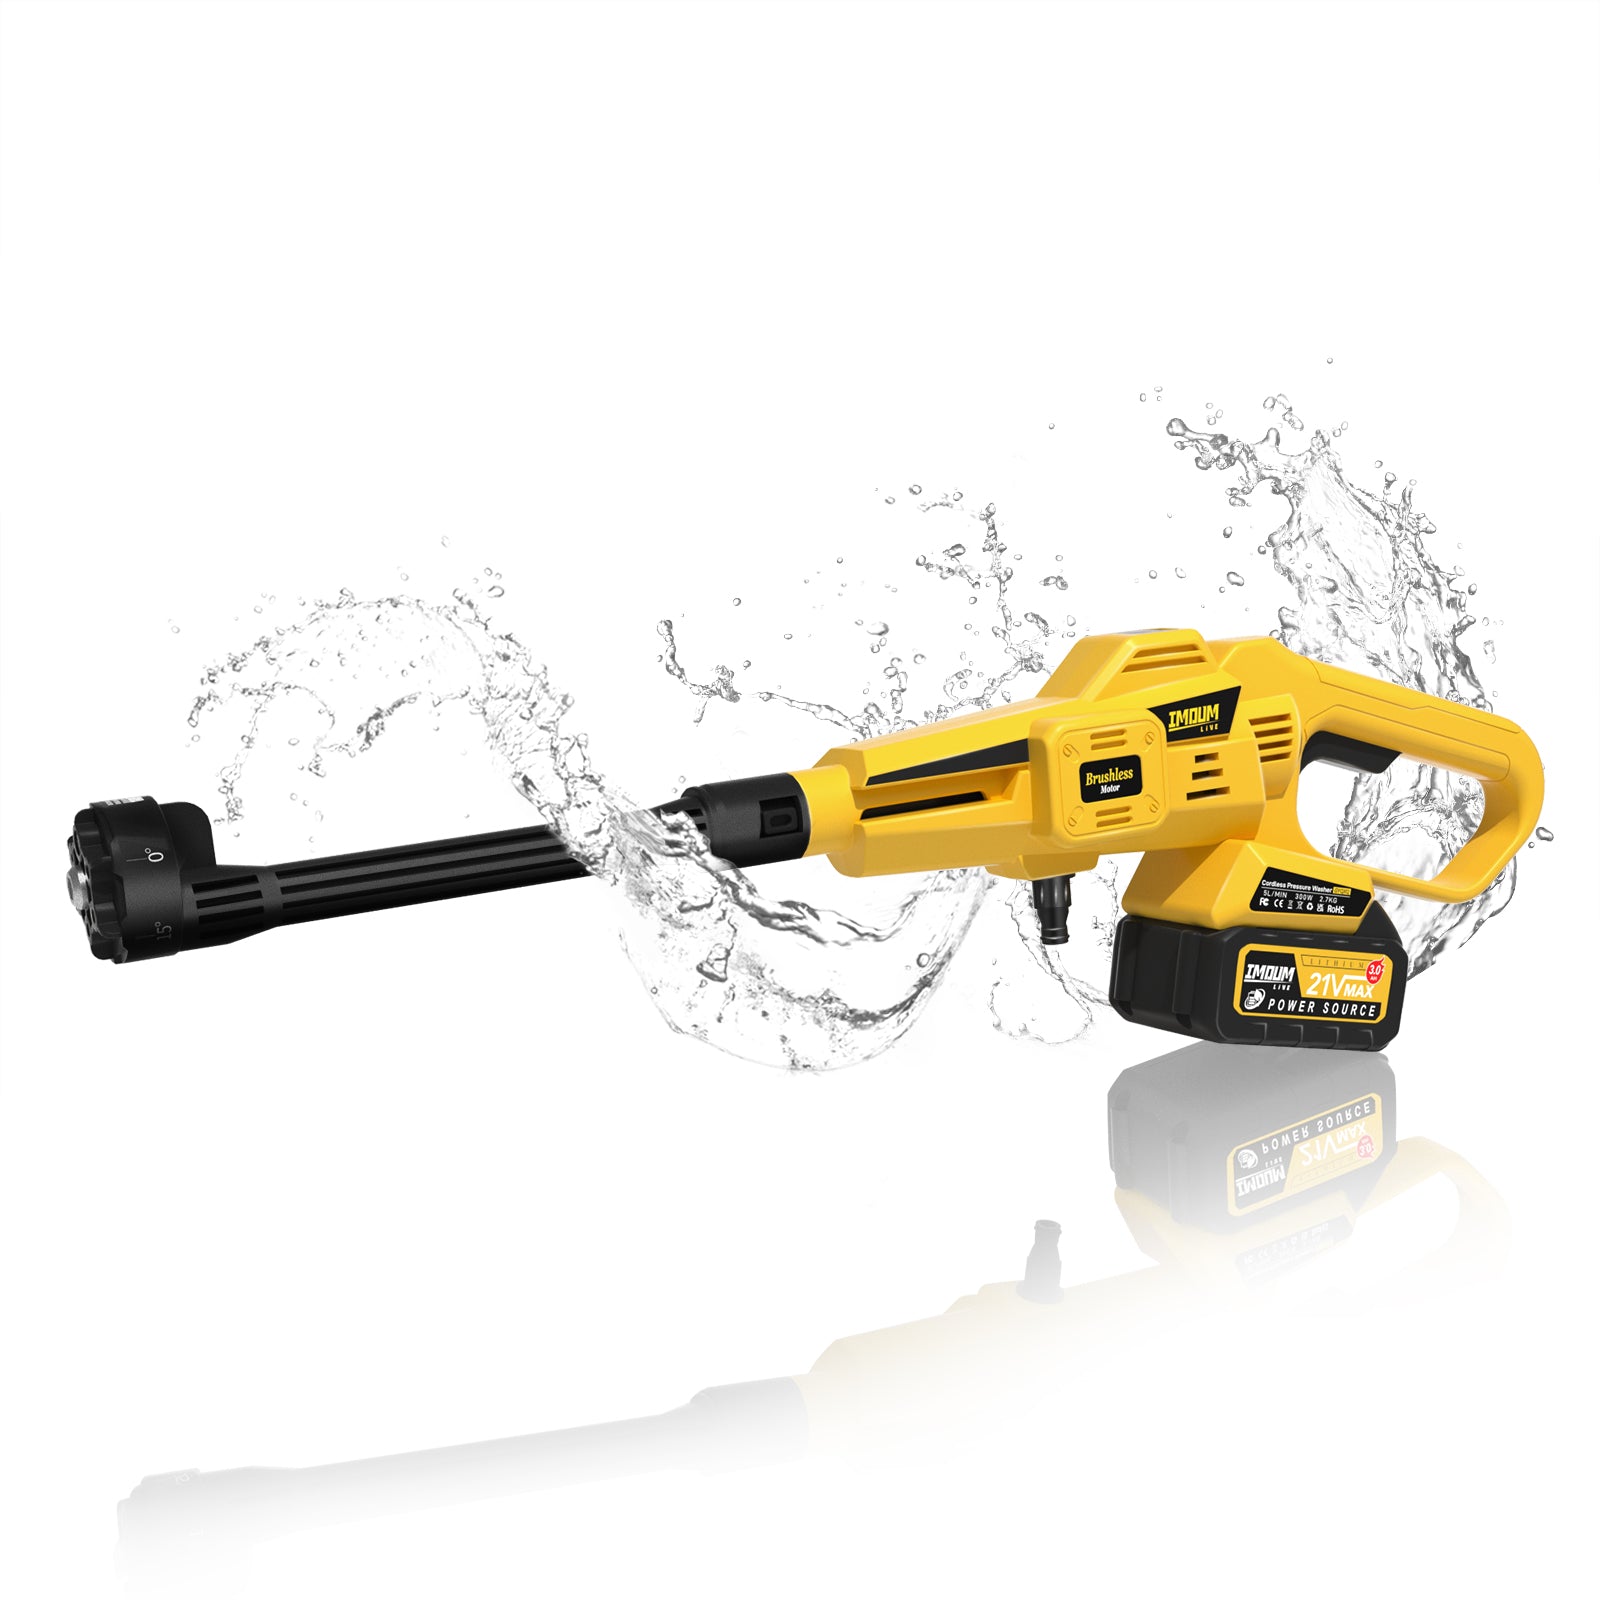 Imoumlive High Pressure Electric Washer - Imoum